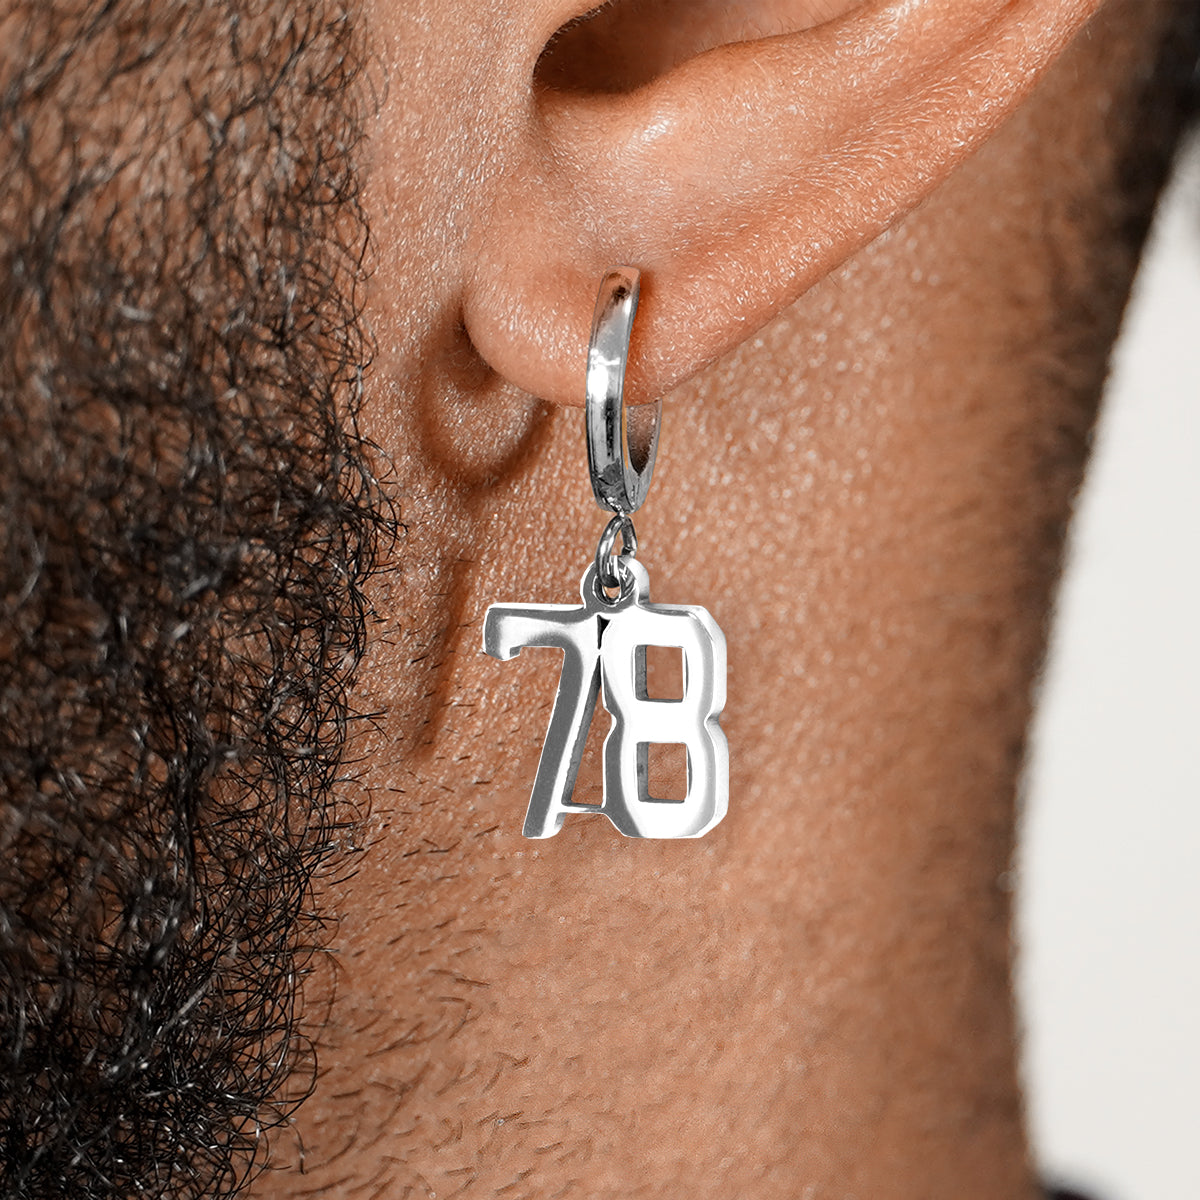 78 Number Earring - Stainless Steel